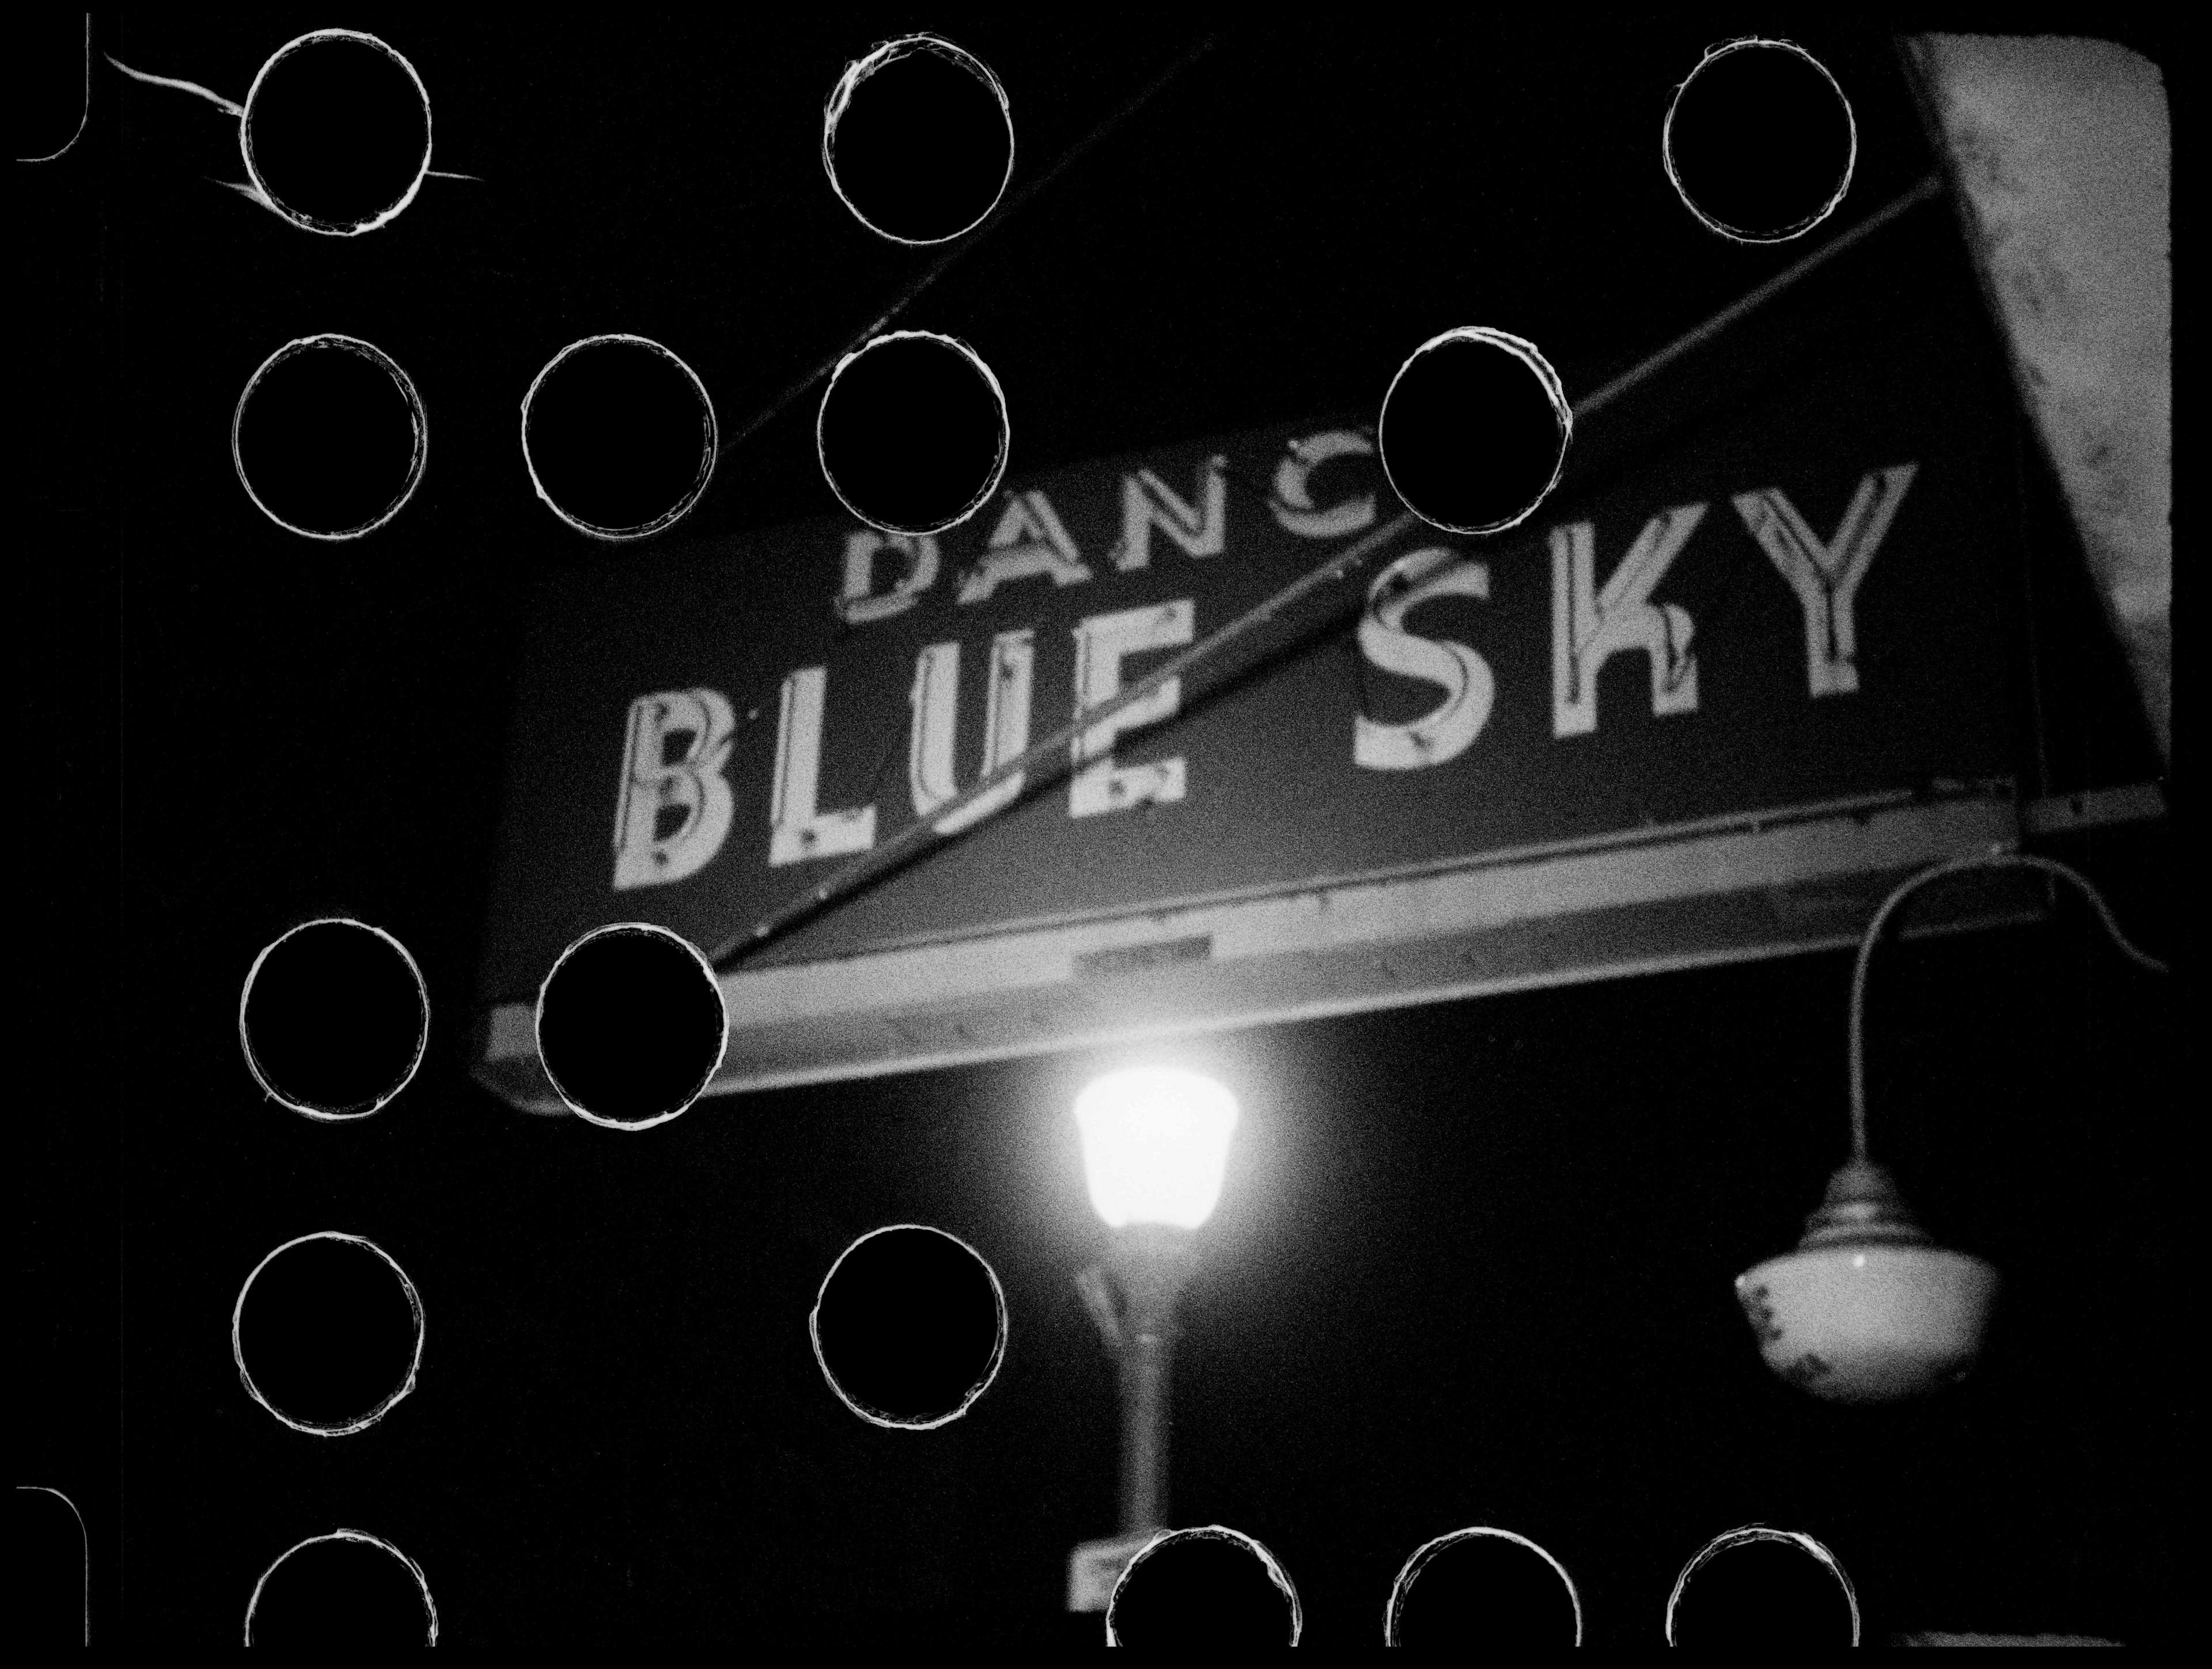 A black and white image of a film frame depicting an unlit neon sign and street light at night. The neon sign reads “DANC BLUE SKY.” Black circles cover the surface of the image. 